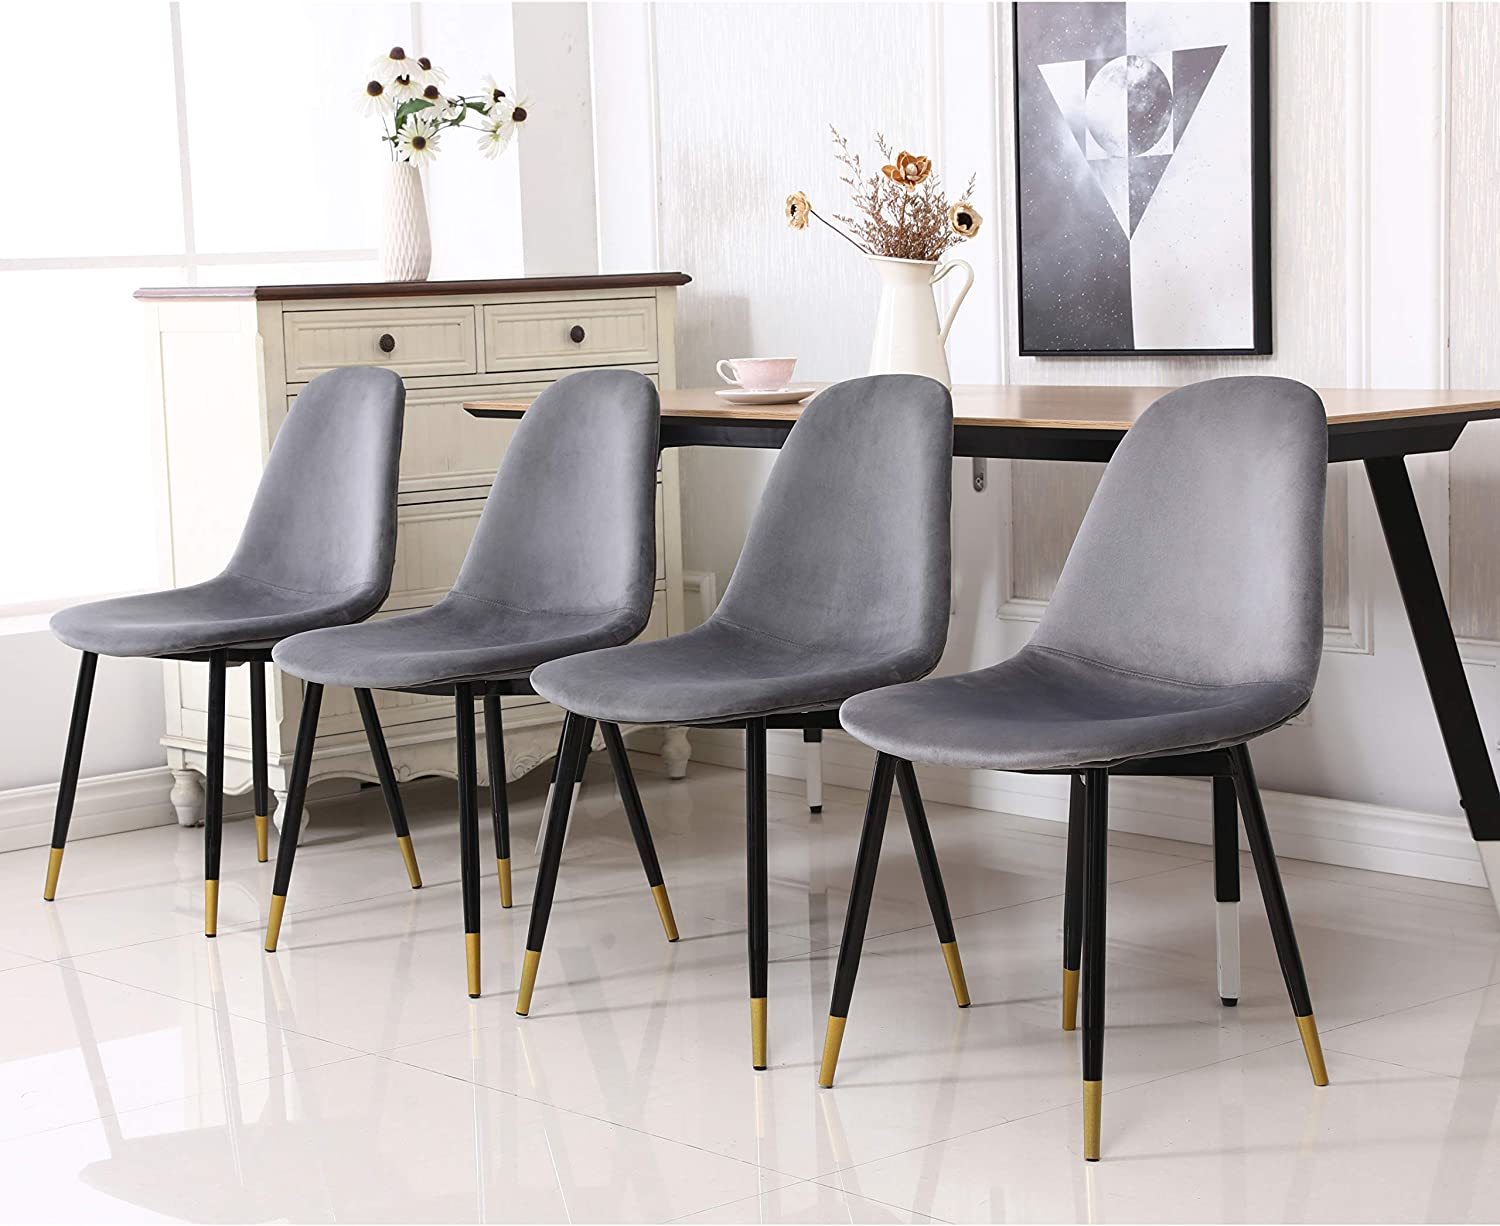 Roundhill Furniture Lassan Contemporary Fabric Dining Chairs, Set of 4, Gray - $180.99